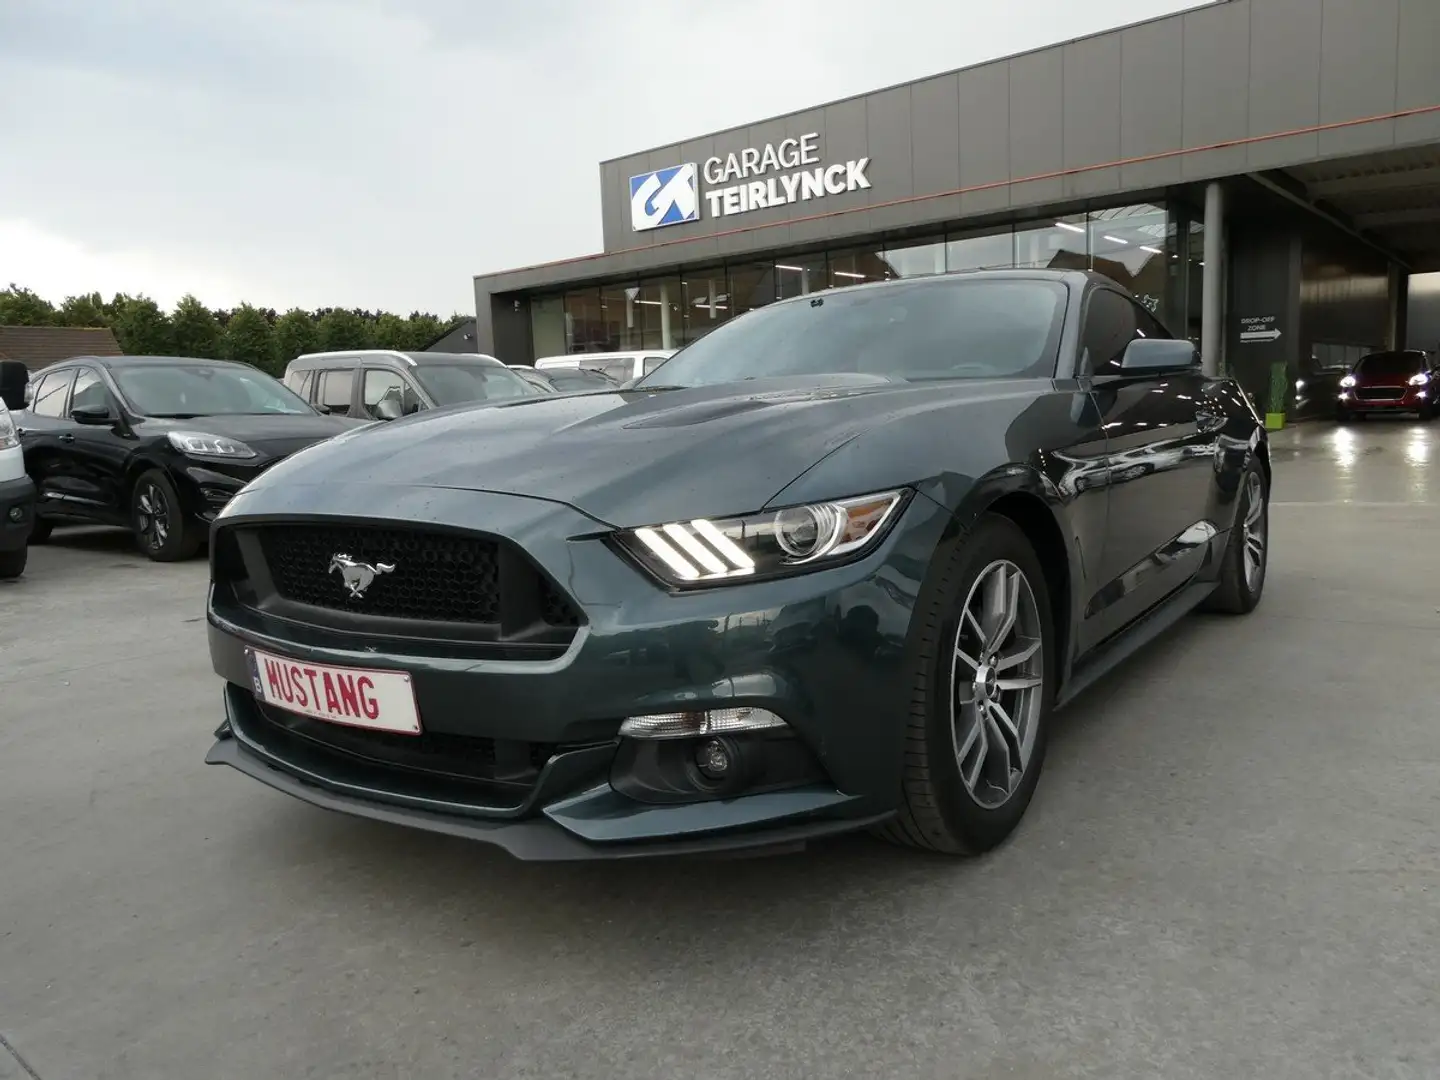 Ford Mustang Coupe Automaat 2.3 i 317pk '15 33000km (48593) Groen - 2